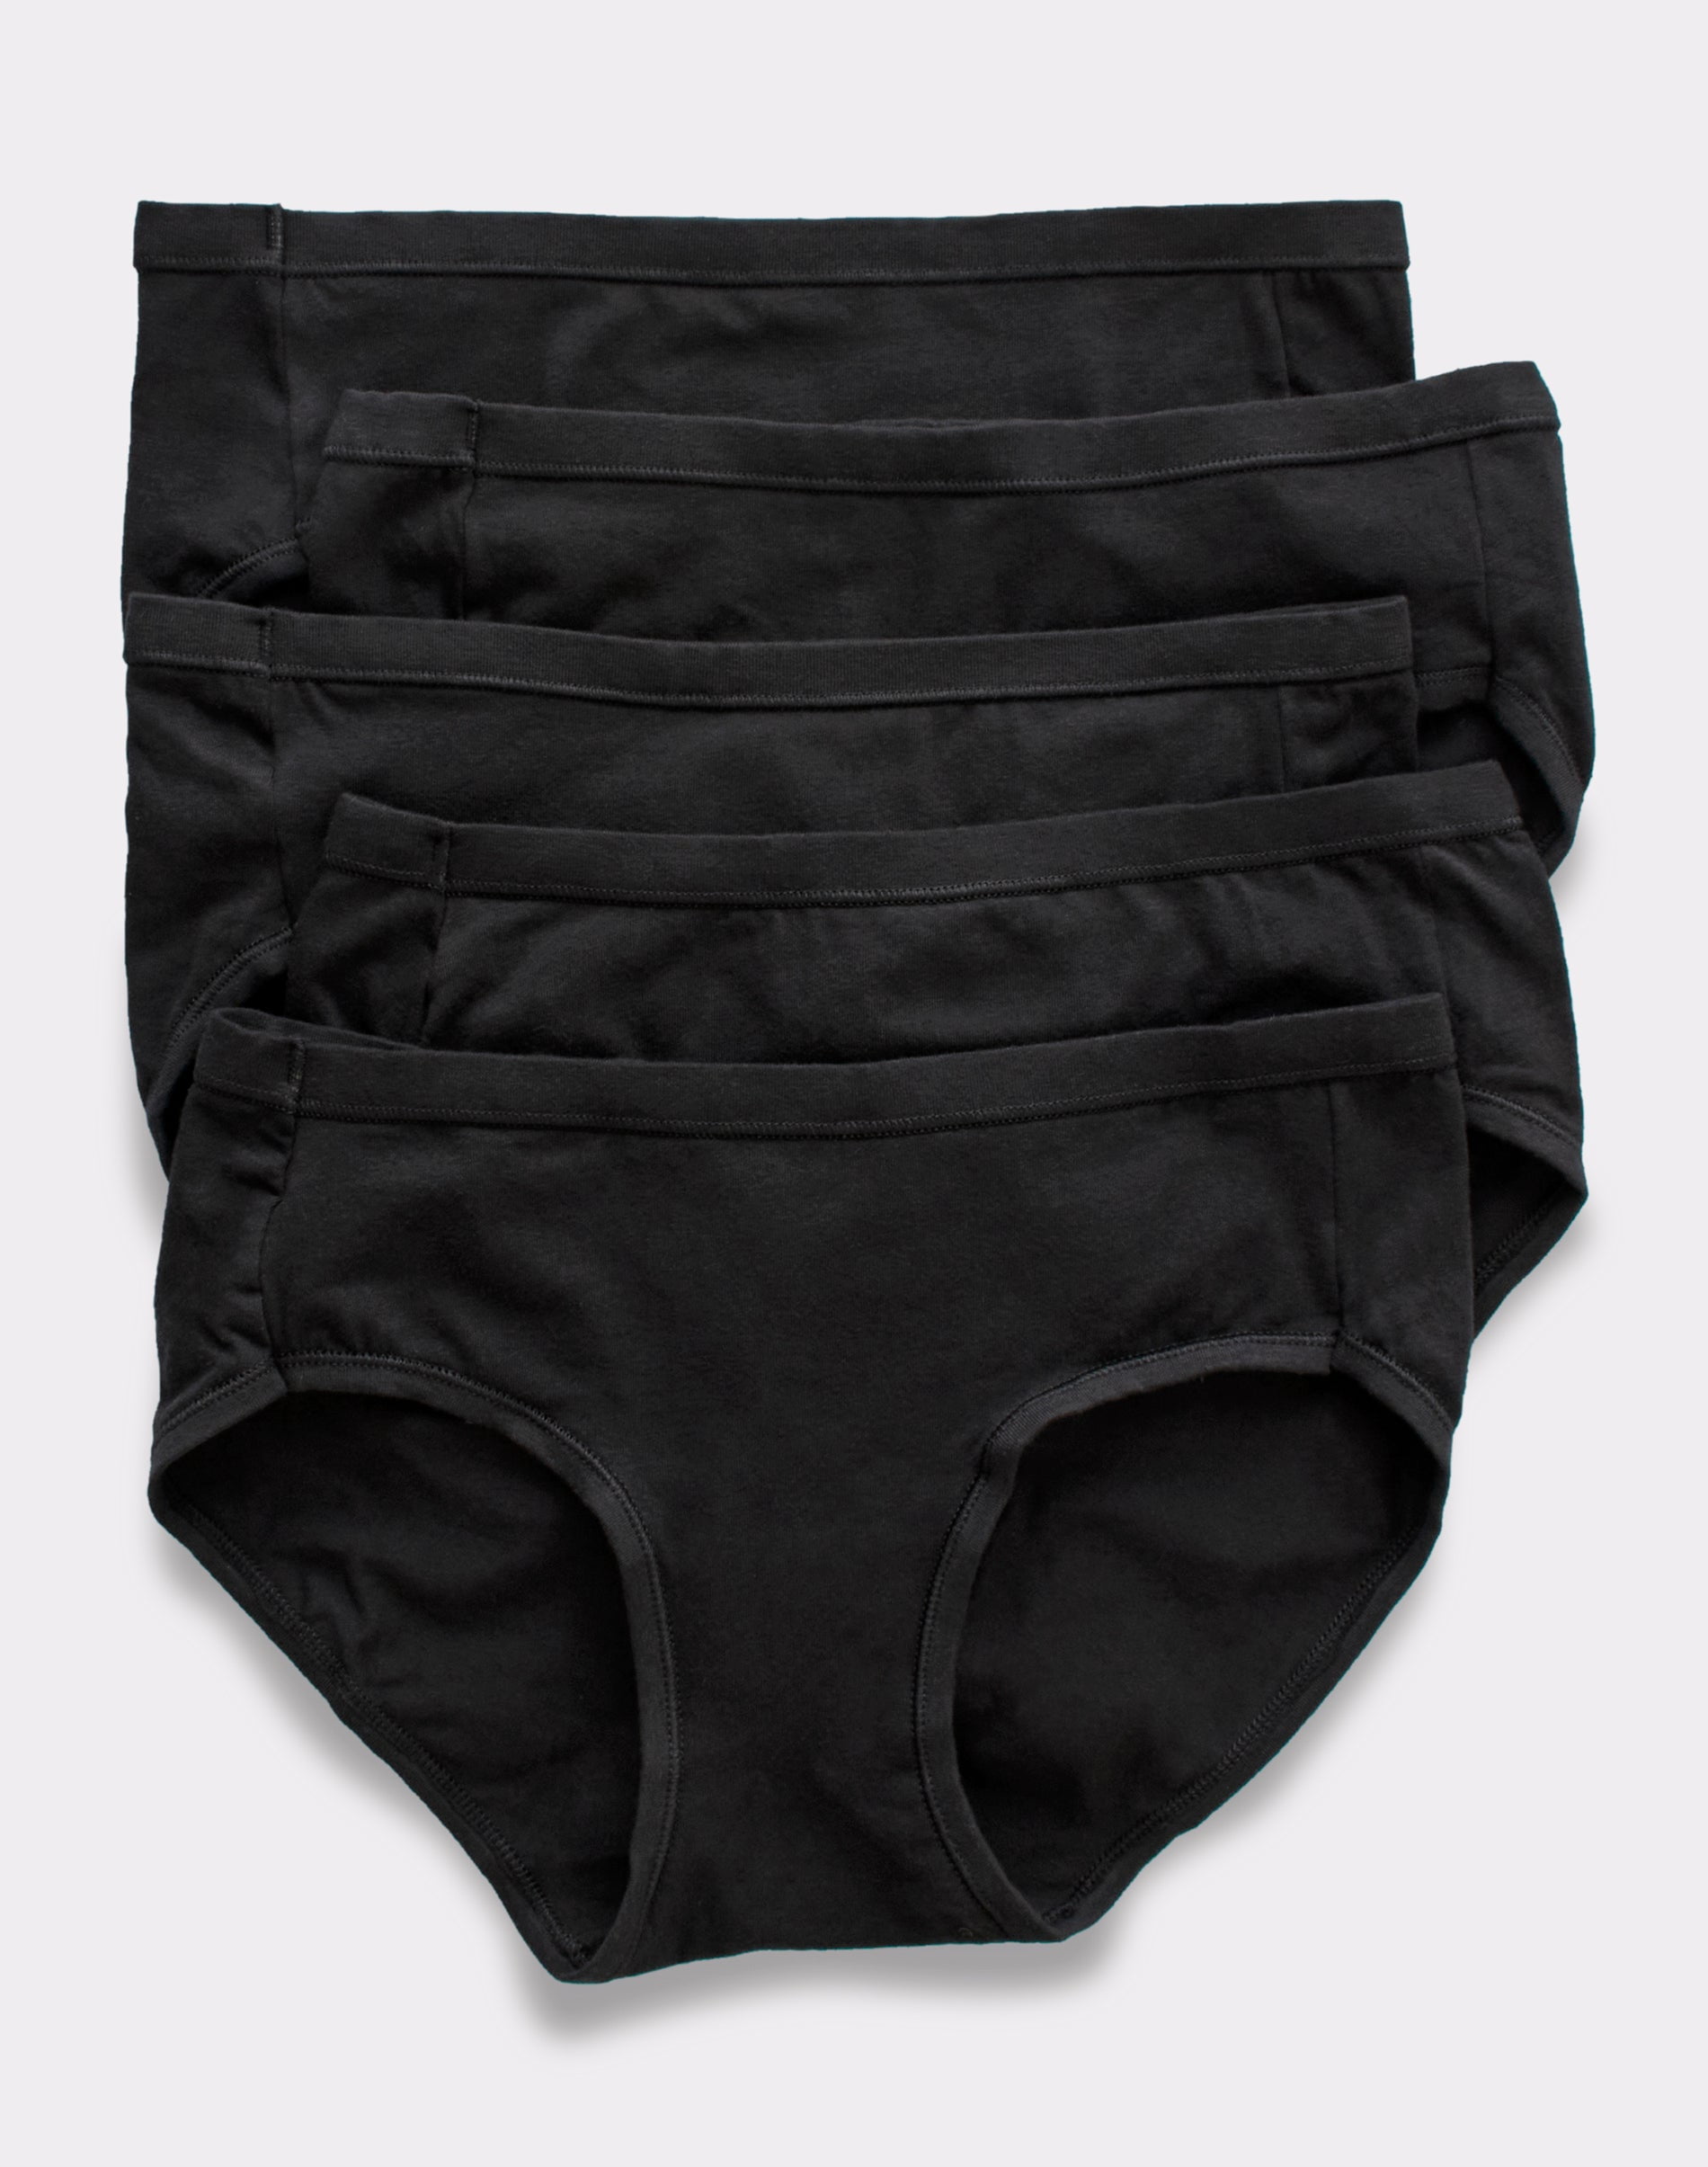 Hanes Ultimate ComfortSoft Women’s Hipster Underwear, 5-Pack  Black/Black/Black/Black/Black 9